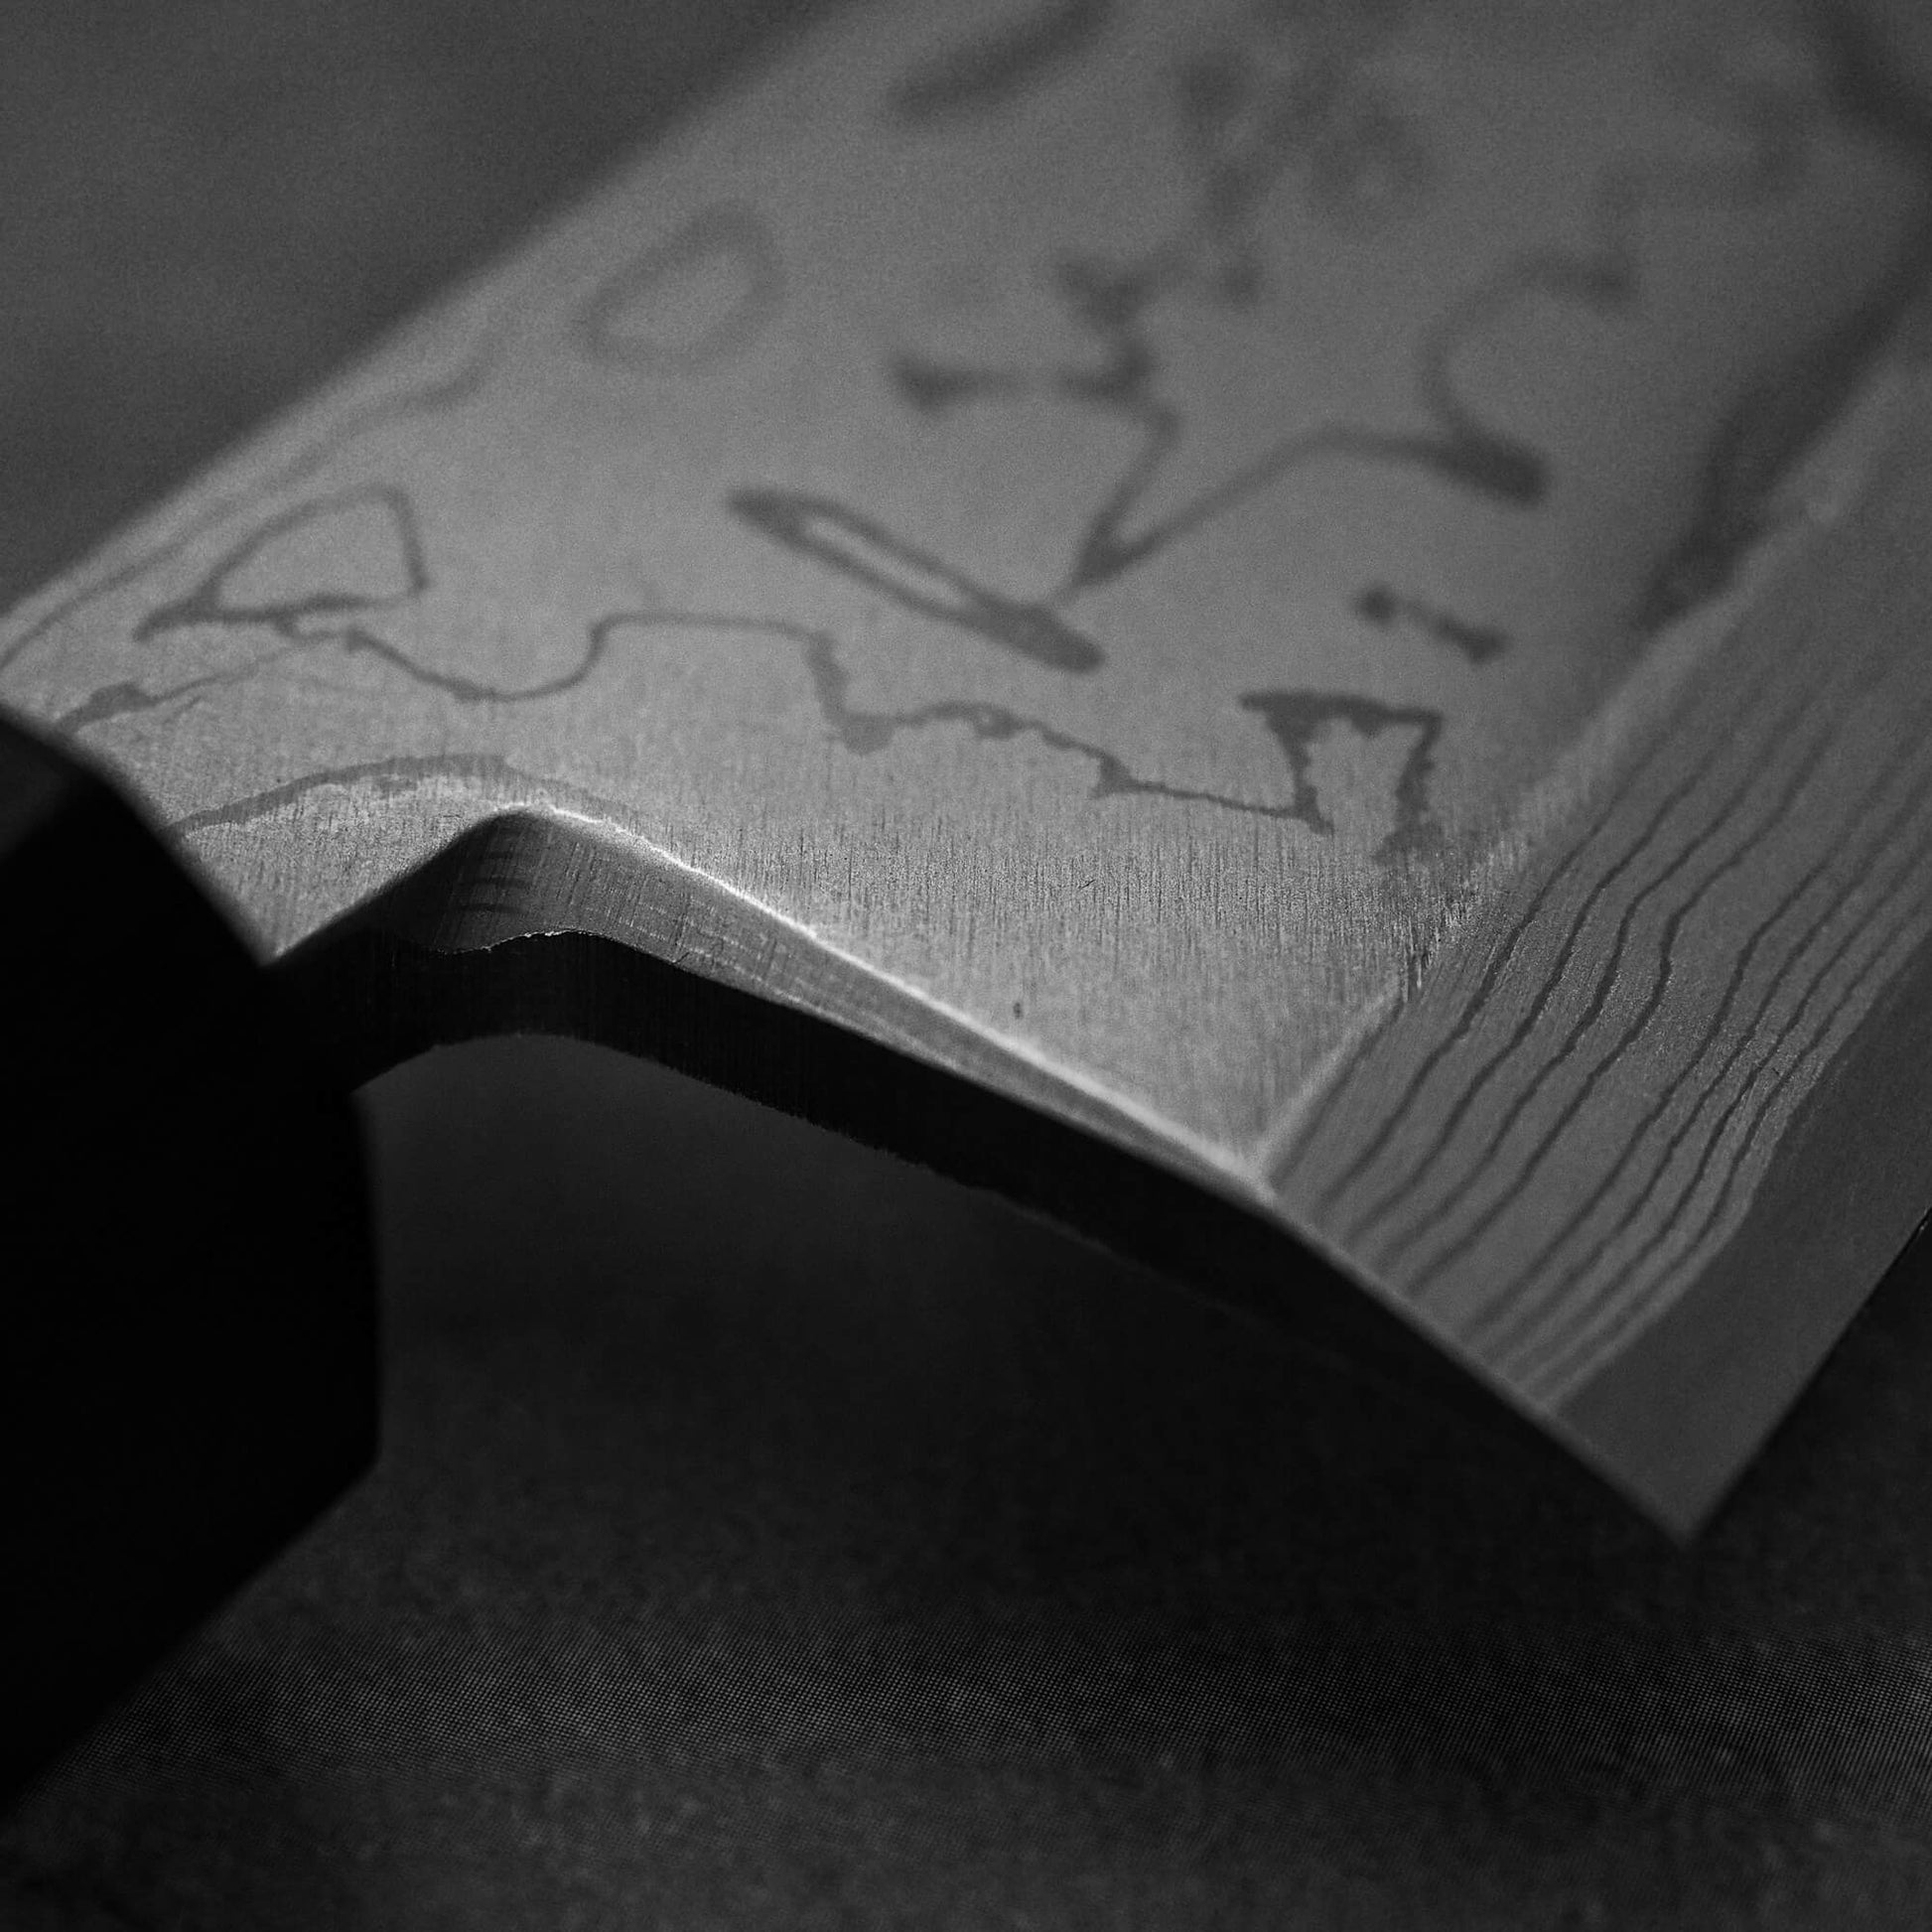 Close up view of Hideo Kitaoka damascus aogami#2 mioroshi deba 210mm. Image focuses on the choil area of the knife.